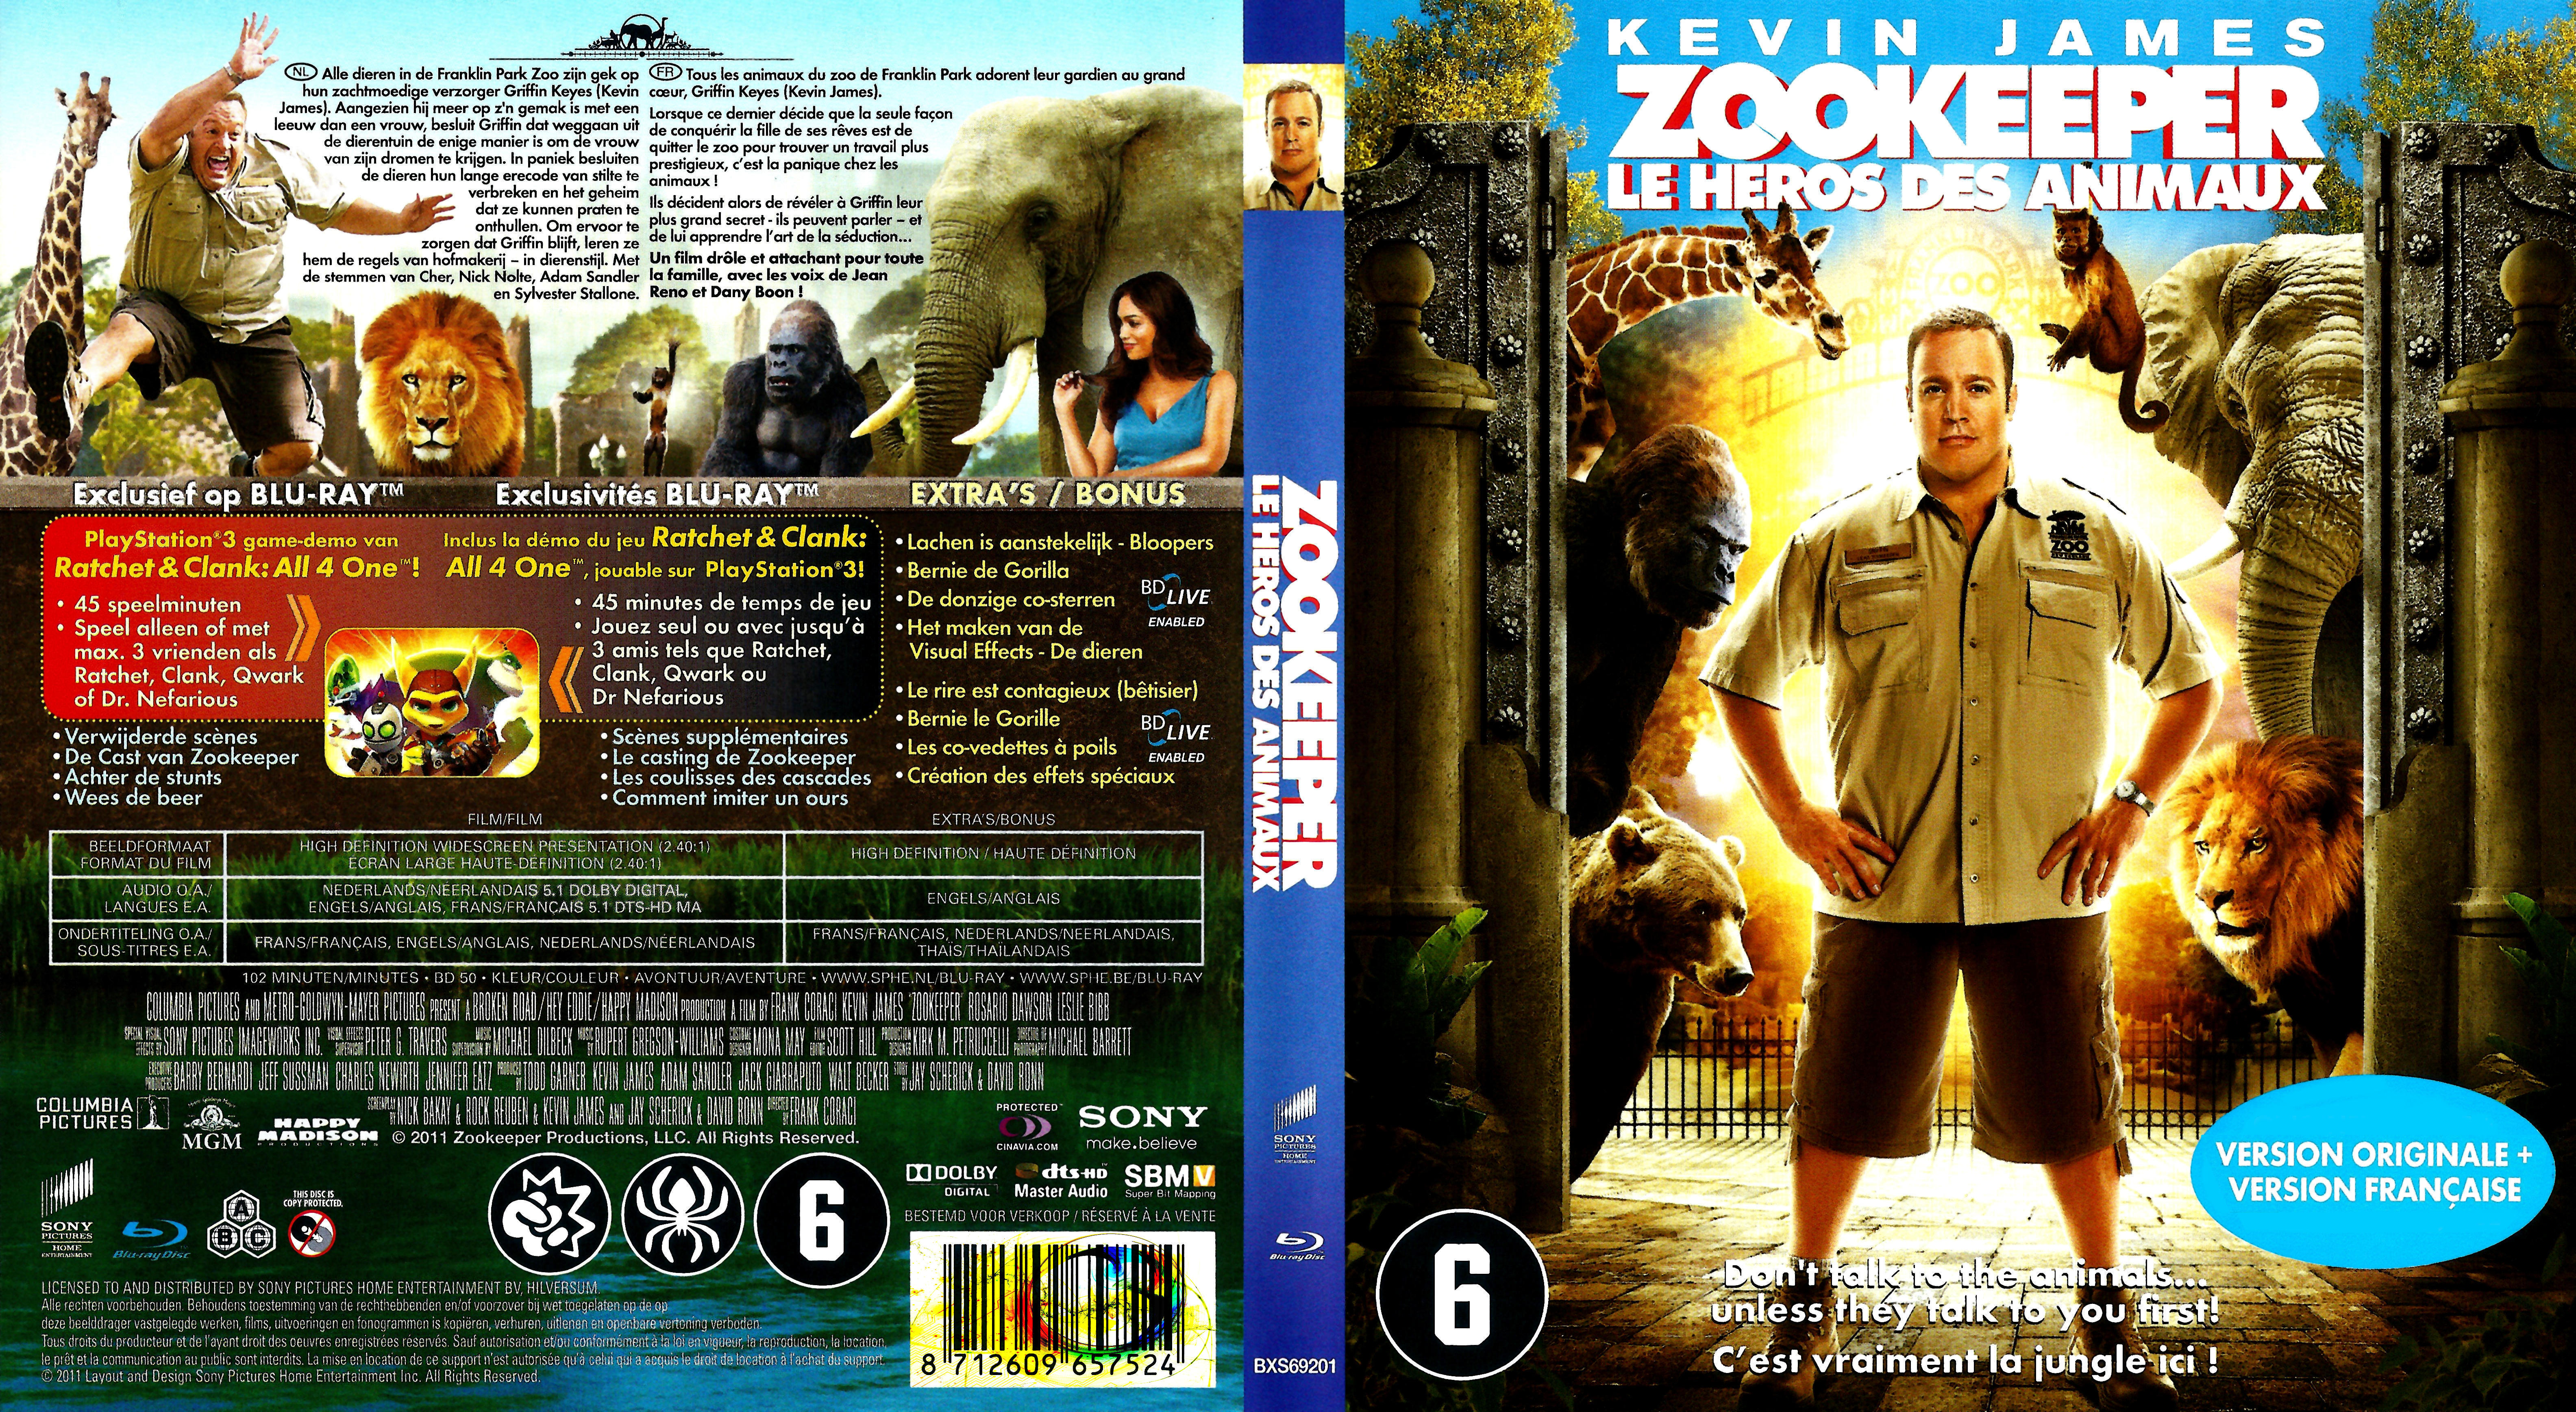 Jaquette DVD Zookeeper (BLU-RAY)